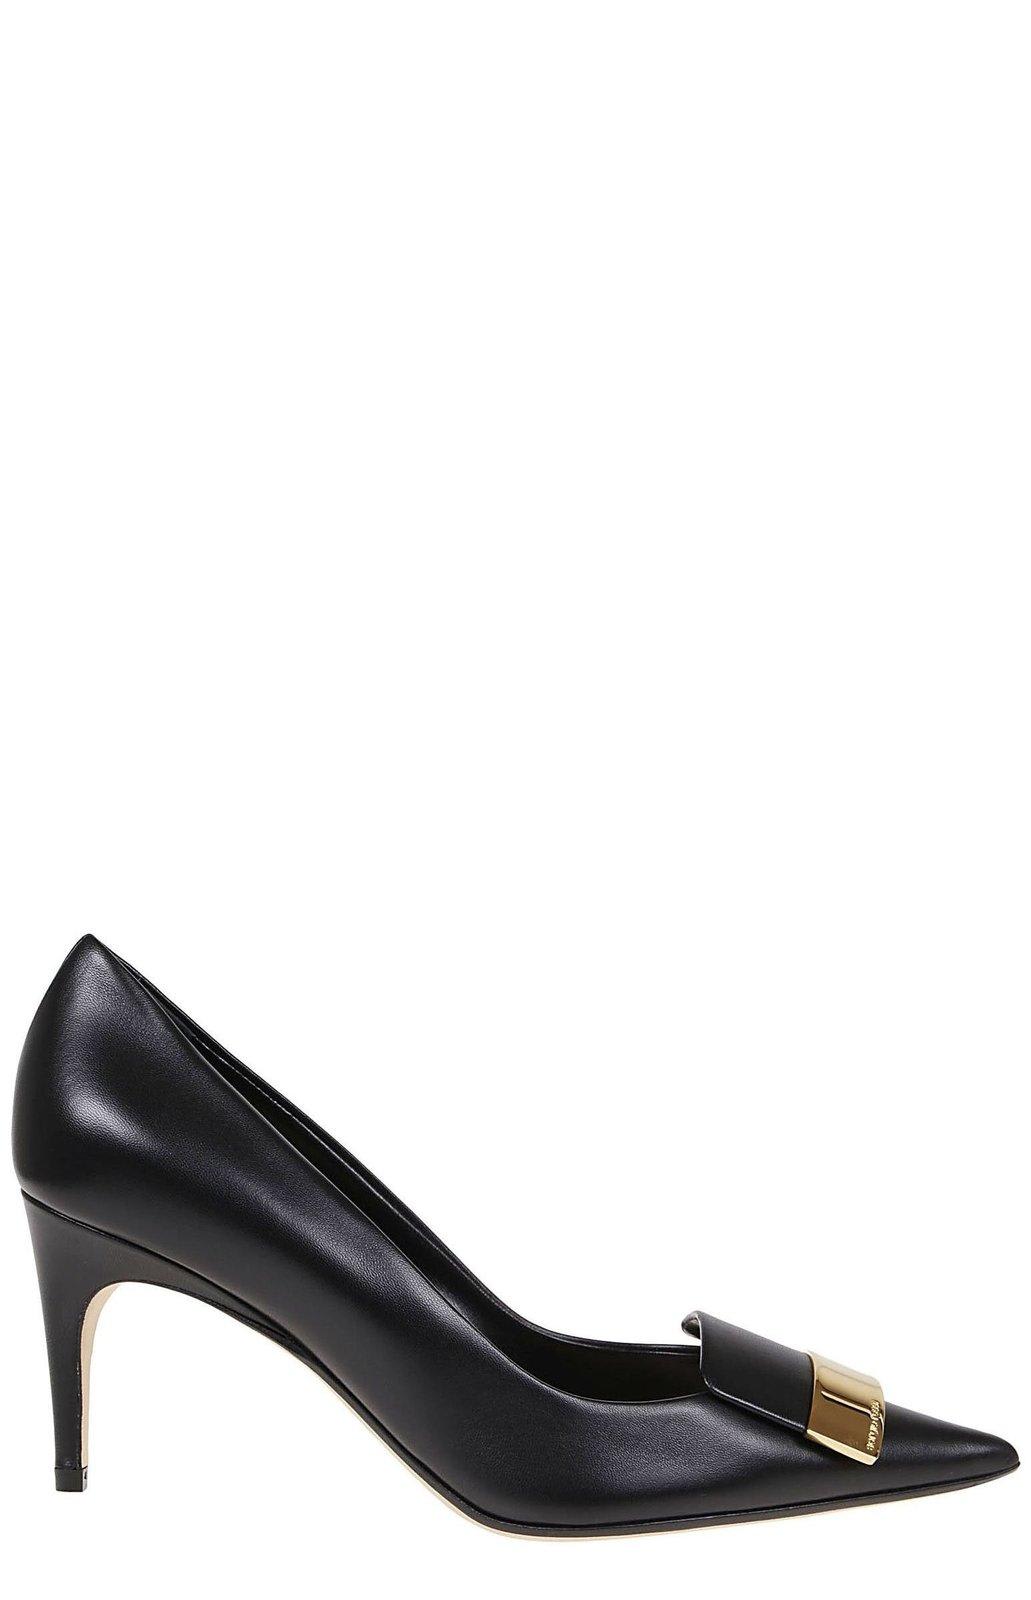 Sr1 Pointed-toe Pumps